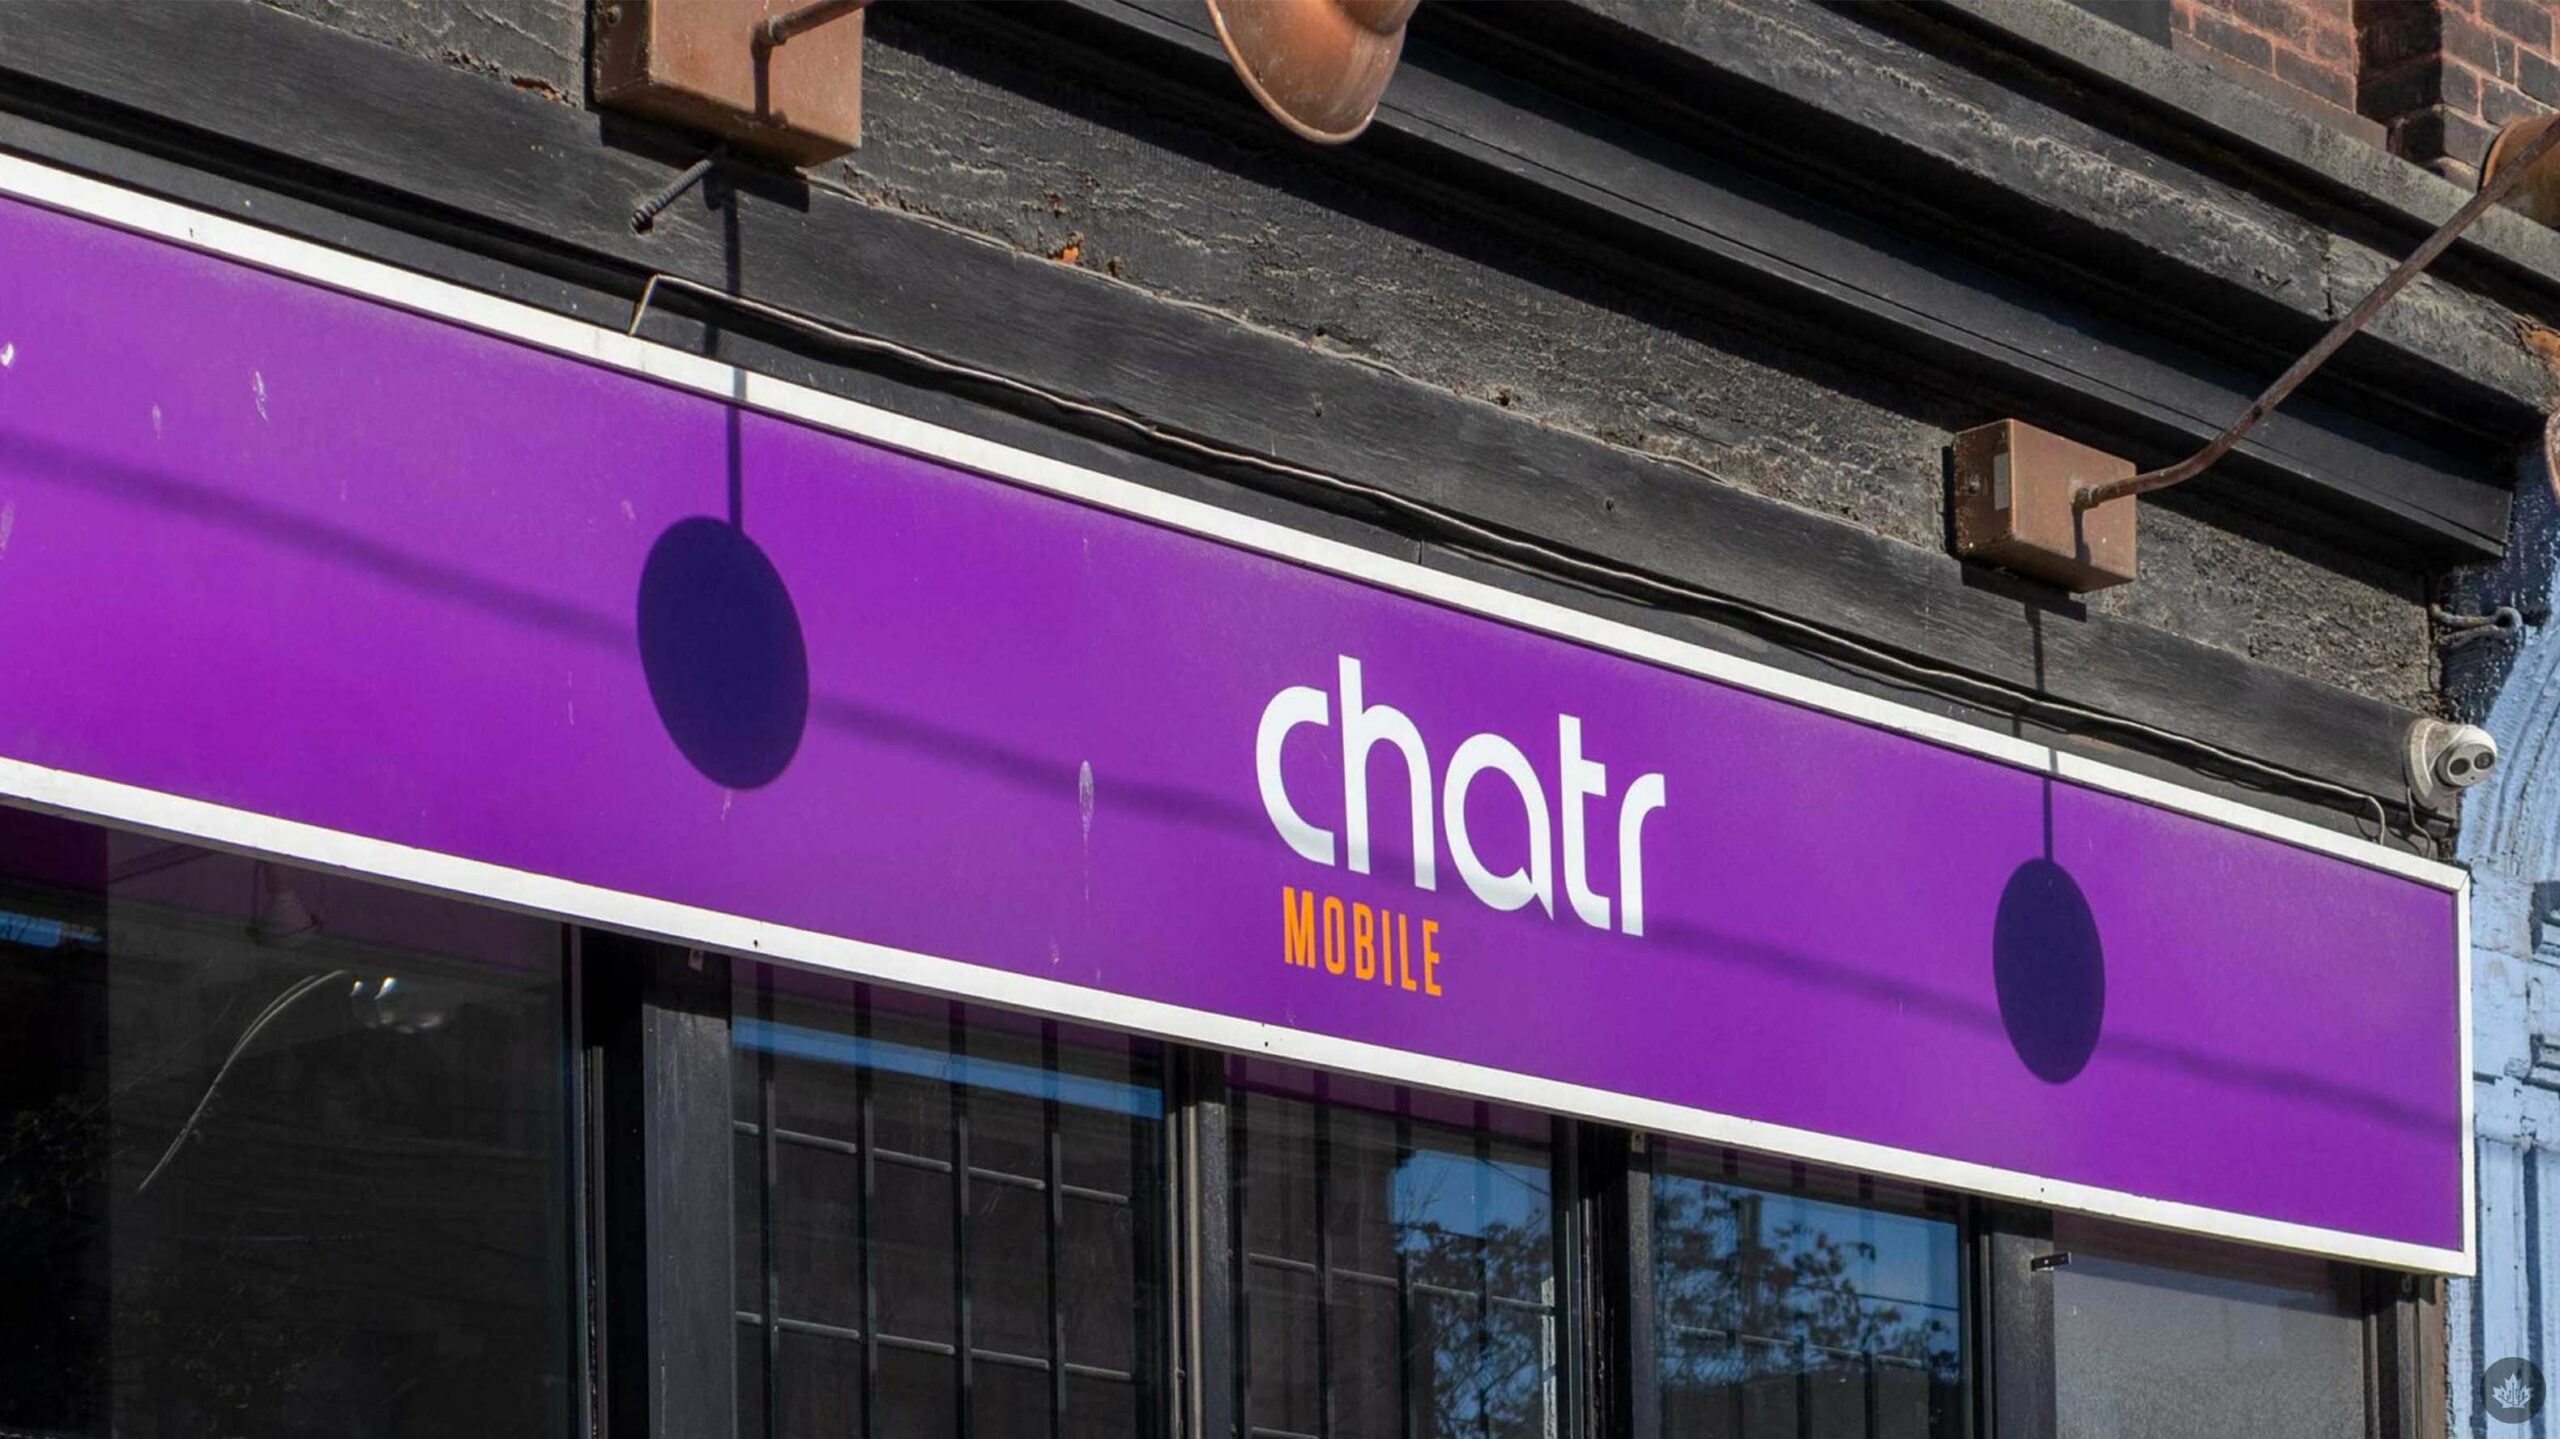 Chatr offering 3GB monthly data bonus for six months, one month free